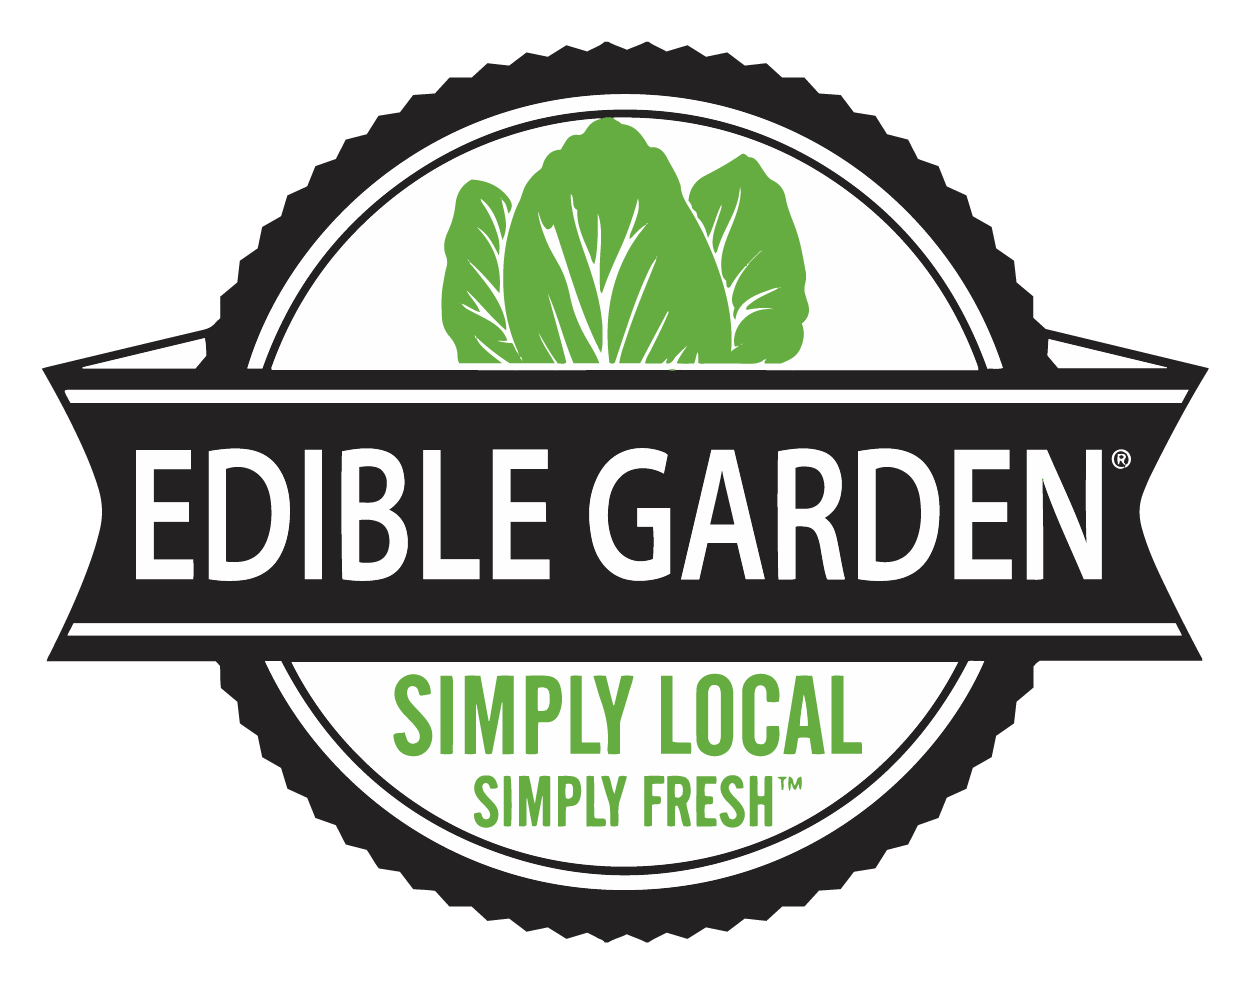 Edible Garden Plunges After $10.2M Equity Offering